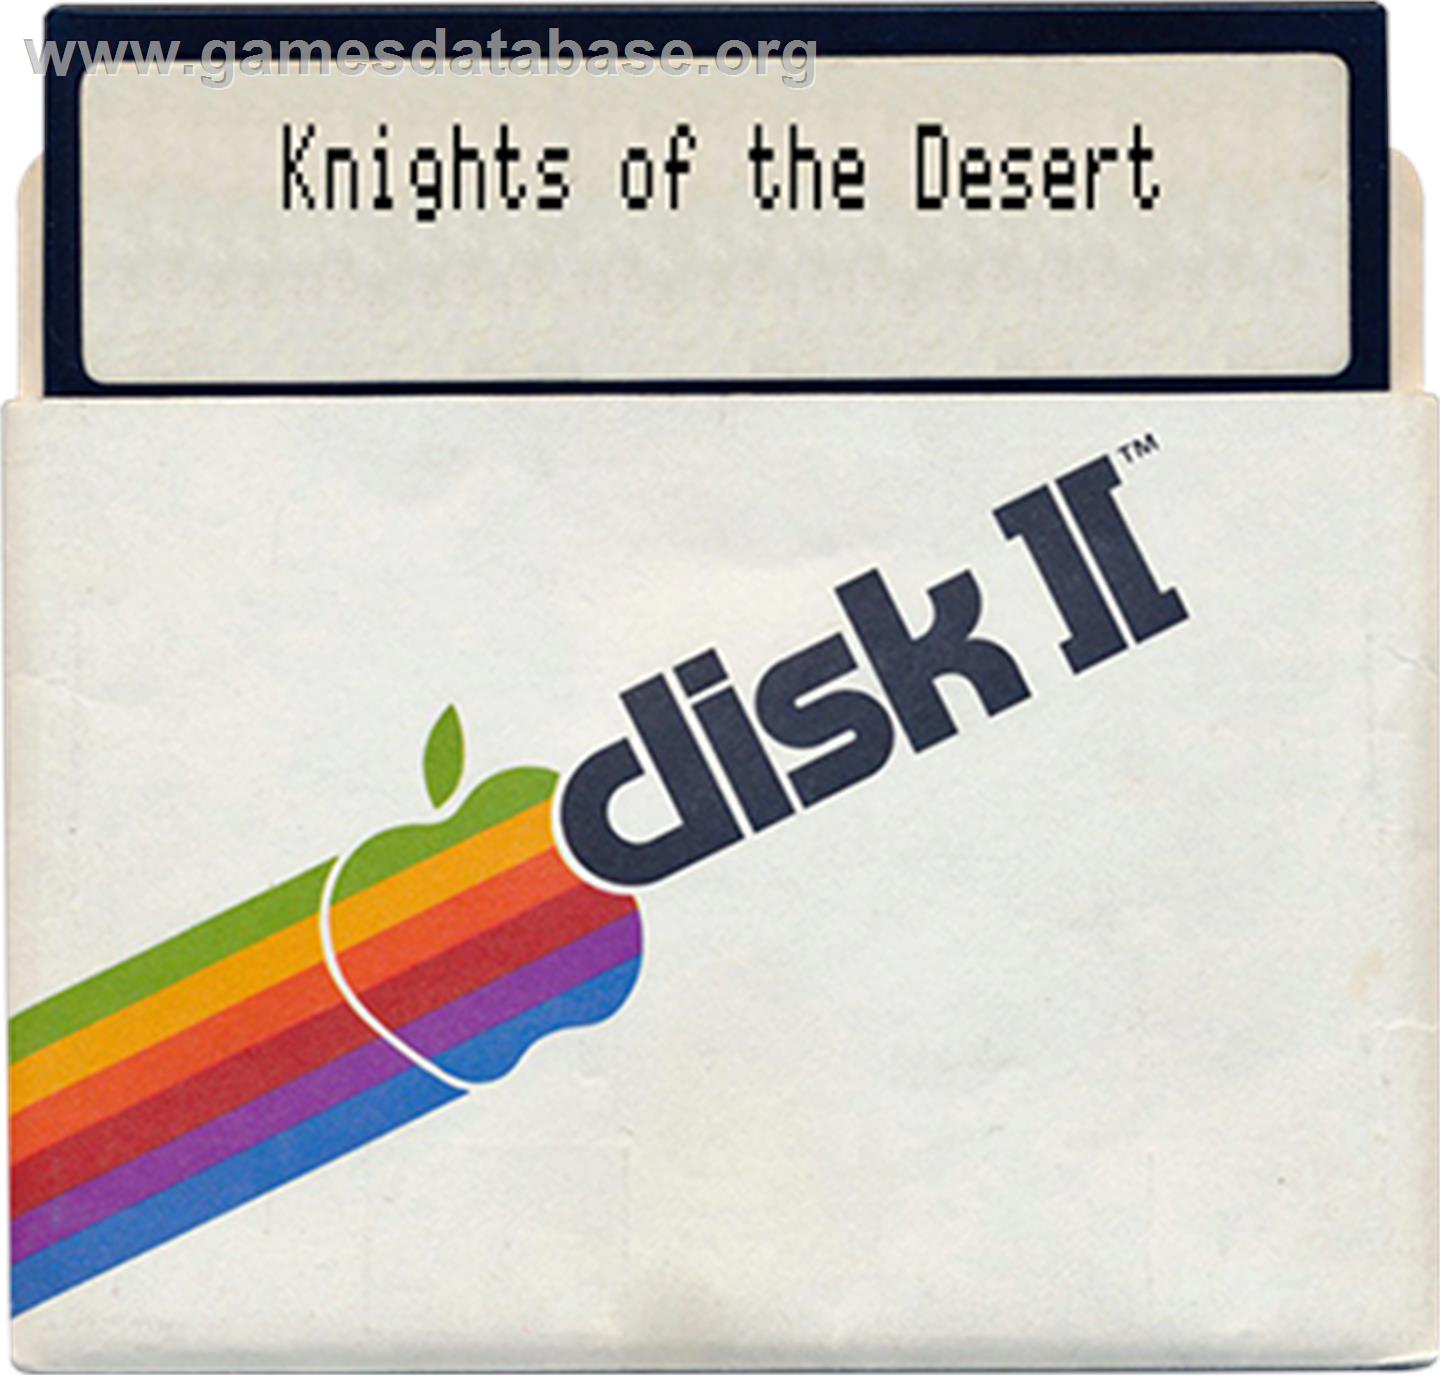 Knights of the Desert: The North African Campaign of 1941-1943 - Apple II - Artwork - Disc